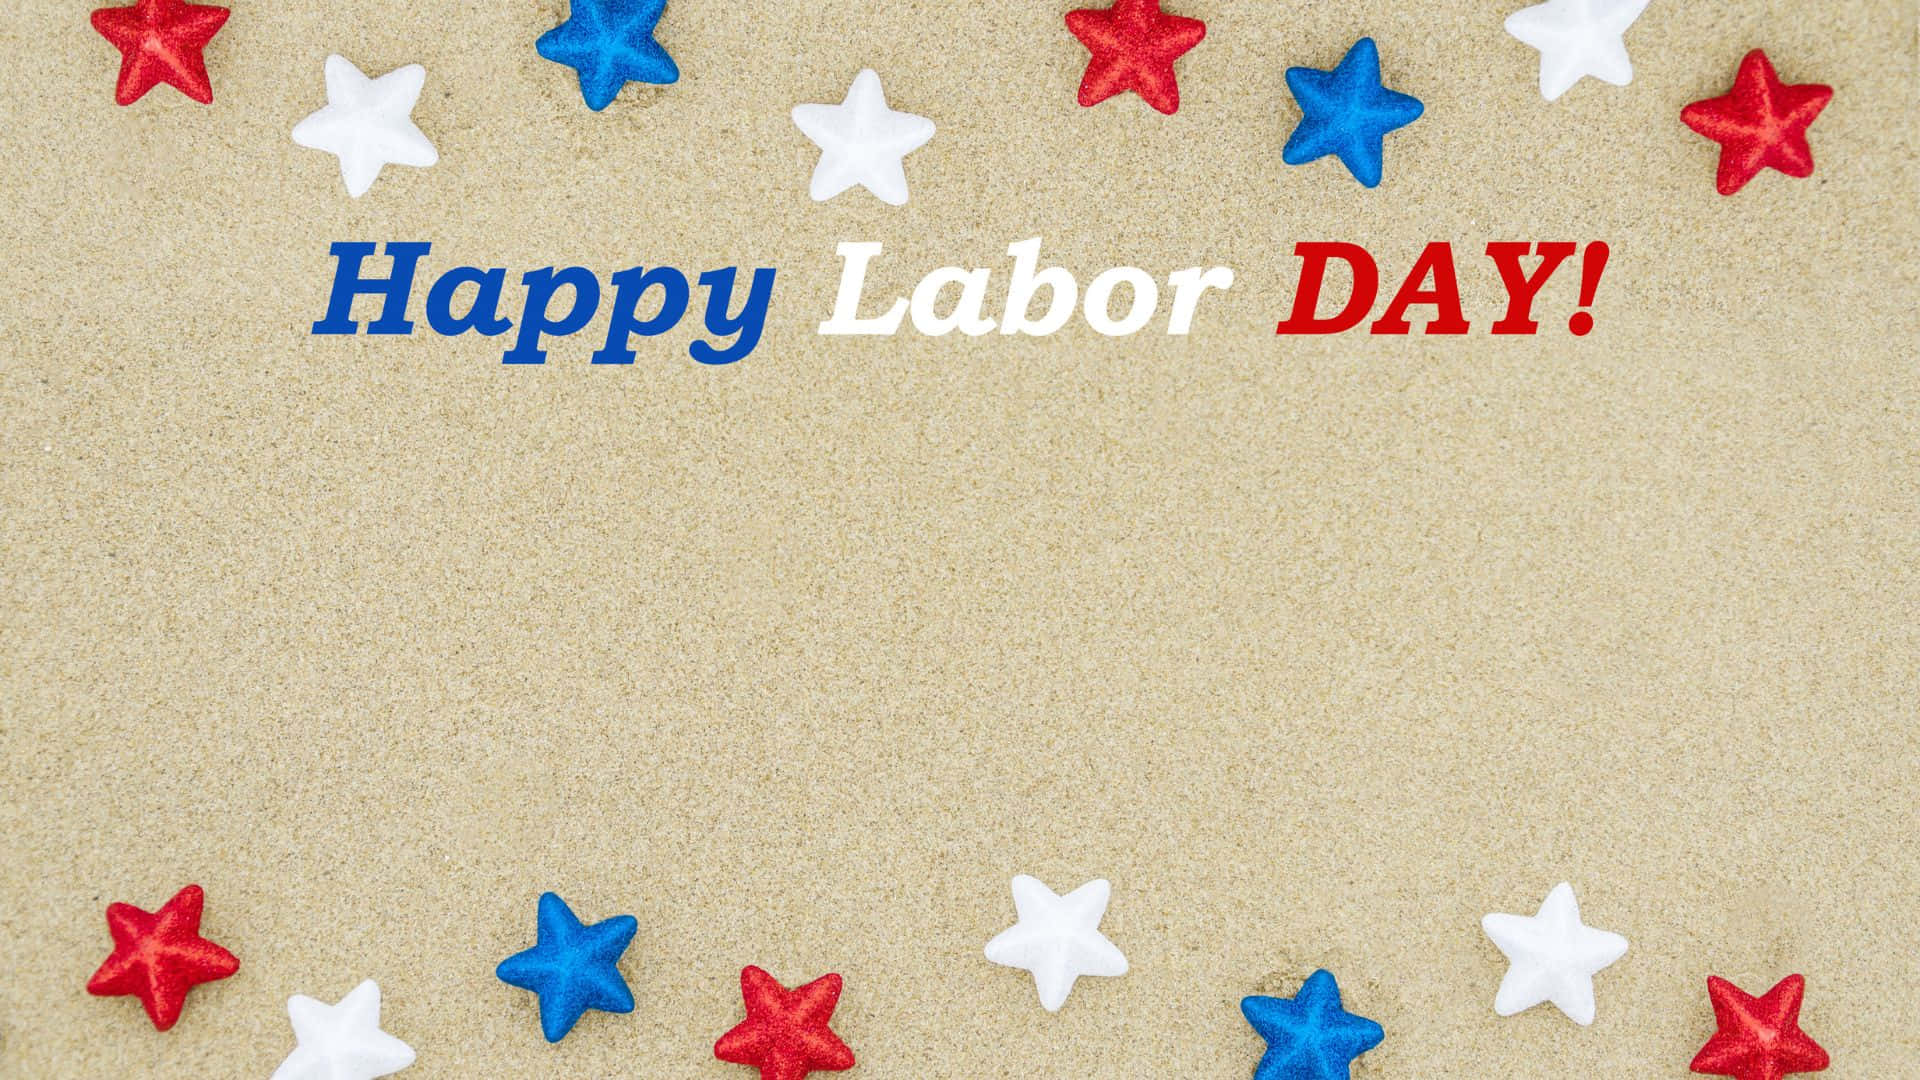 Celebrating Labor Day with an American Flag Background